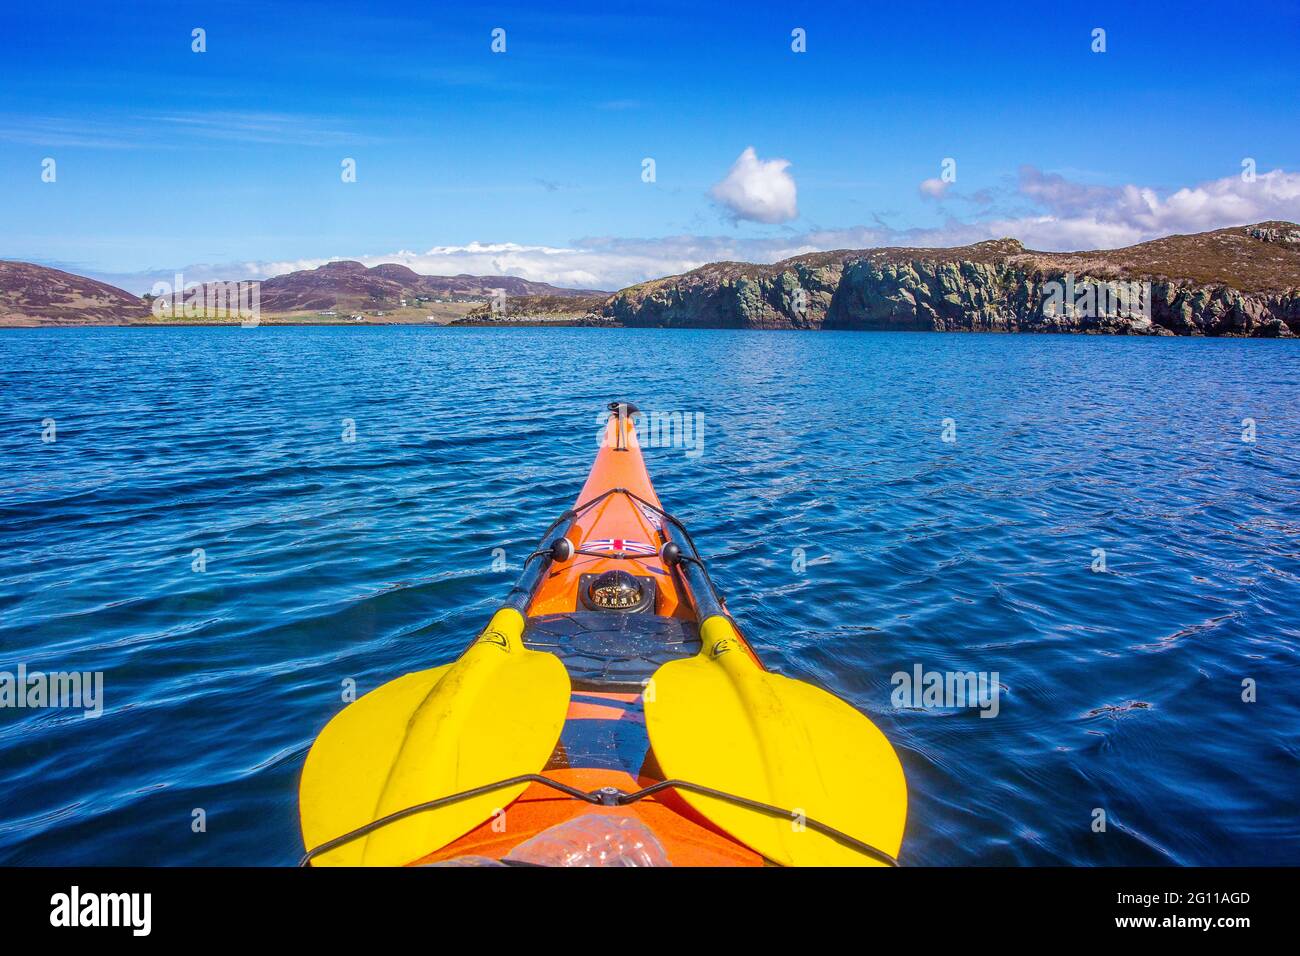 Sea kayaking in the Summer Isles in the North West Highlands of Scotland Stock Photo